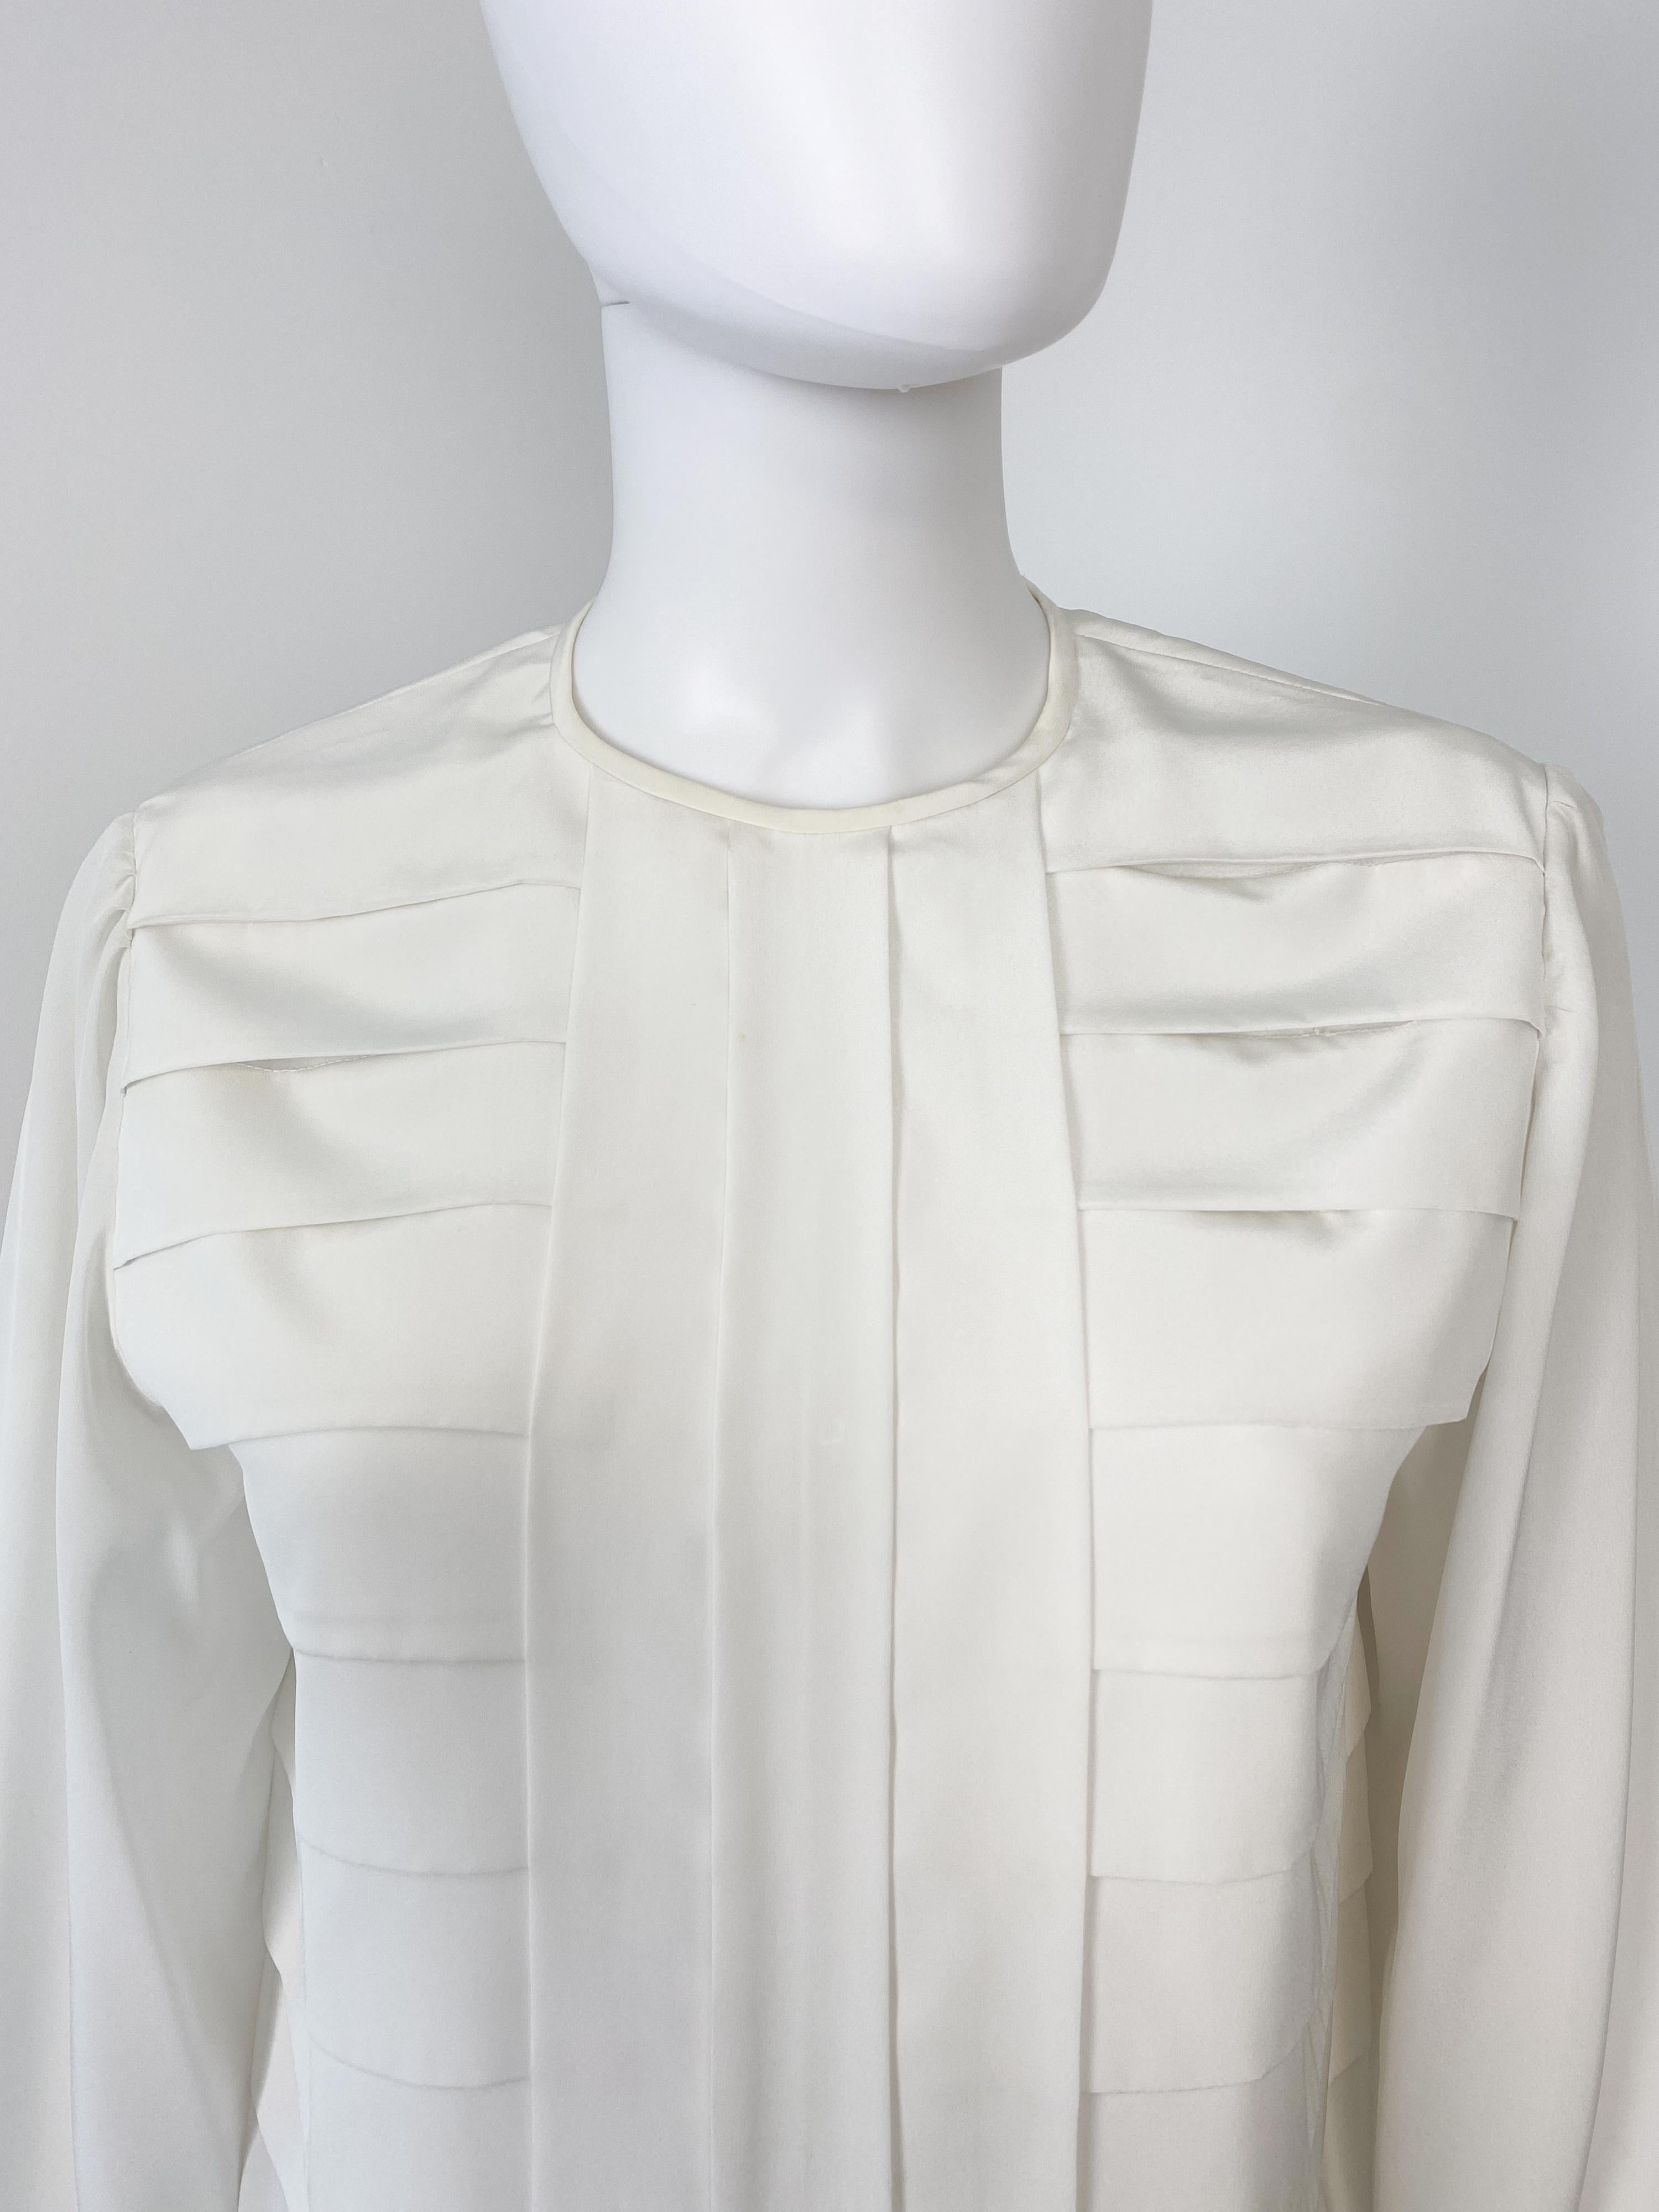 Vintage 1970s Silky Polyester Blouse Top White Origami Pleat Size 10/12 In Excellent Condition For Sale In Atlanta, GA